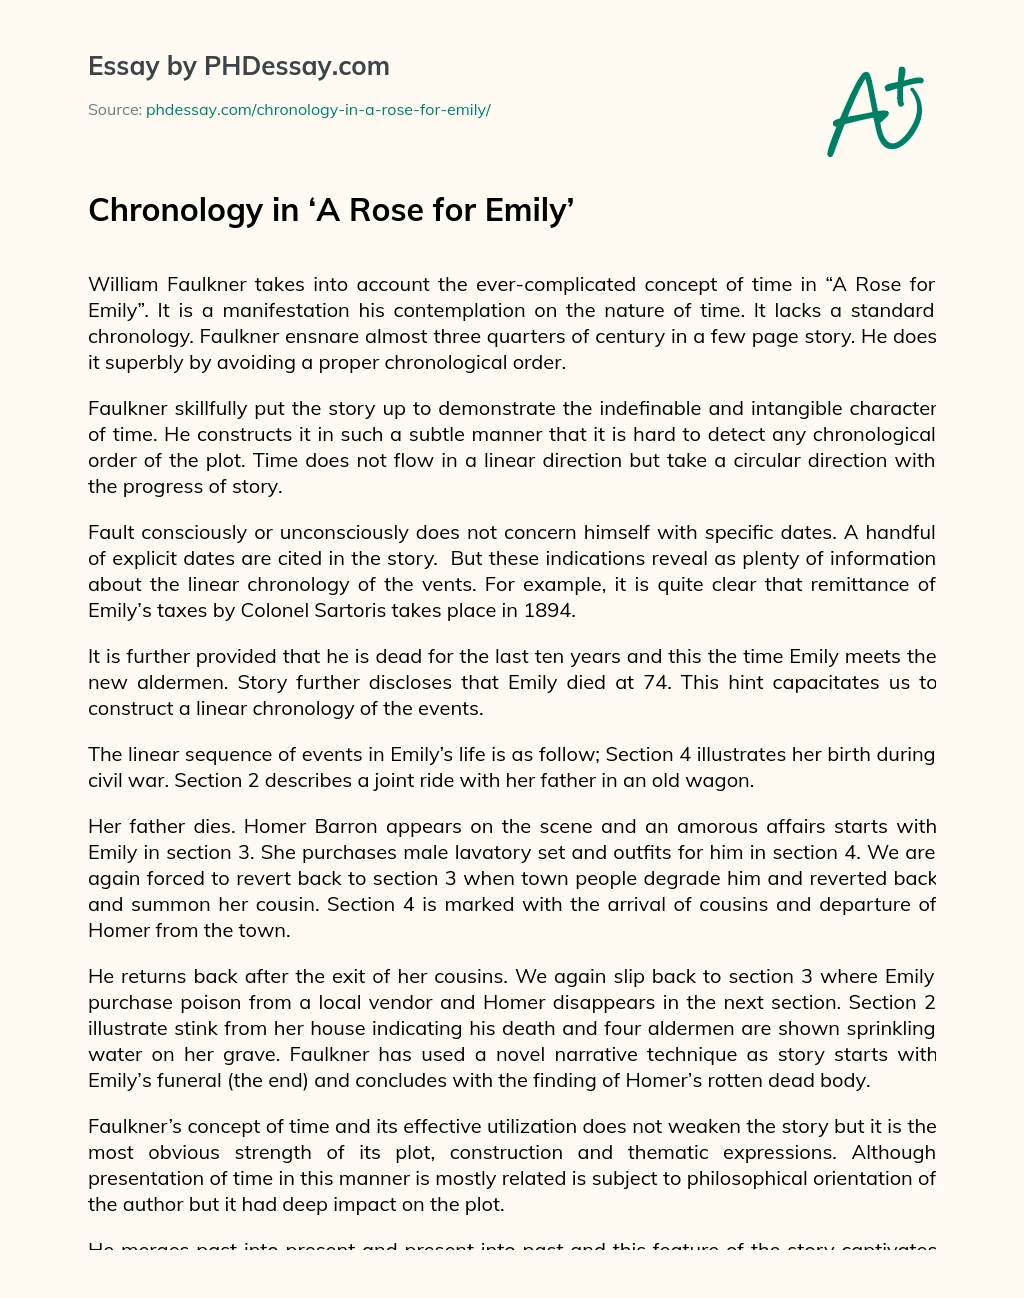 Chronology in ‘A Rose for Emily’ essay